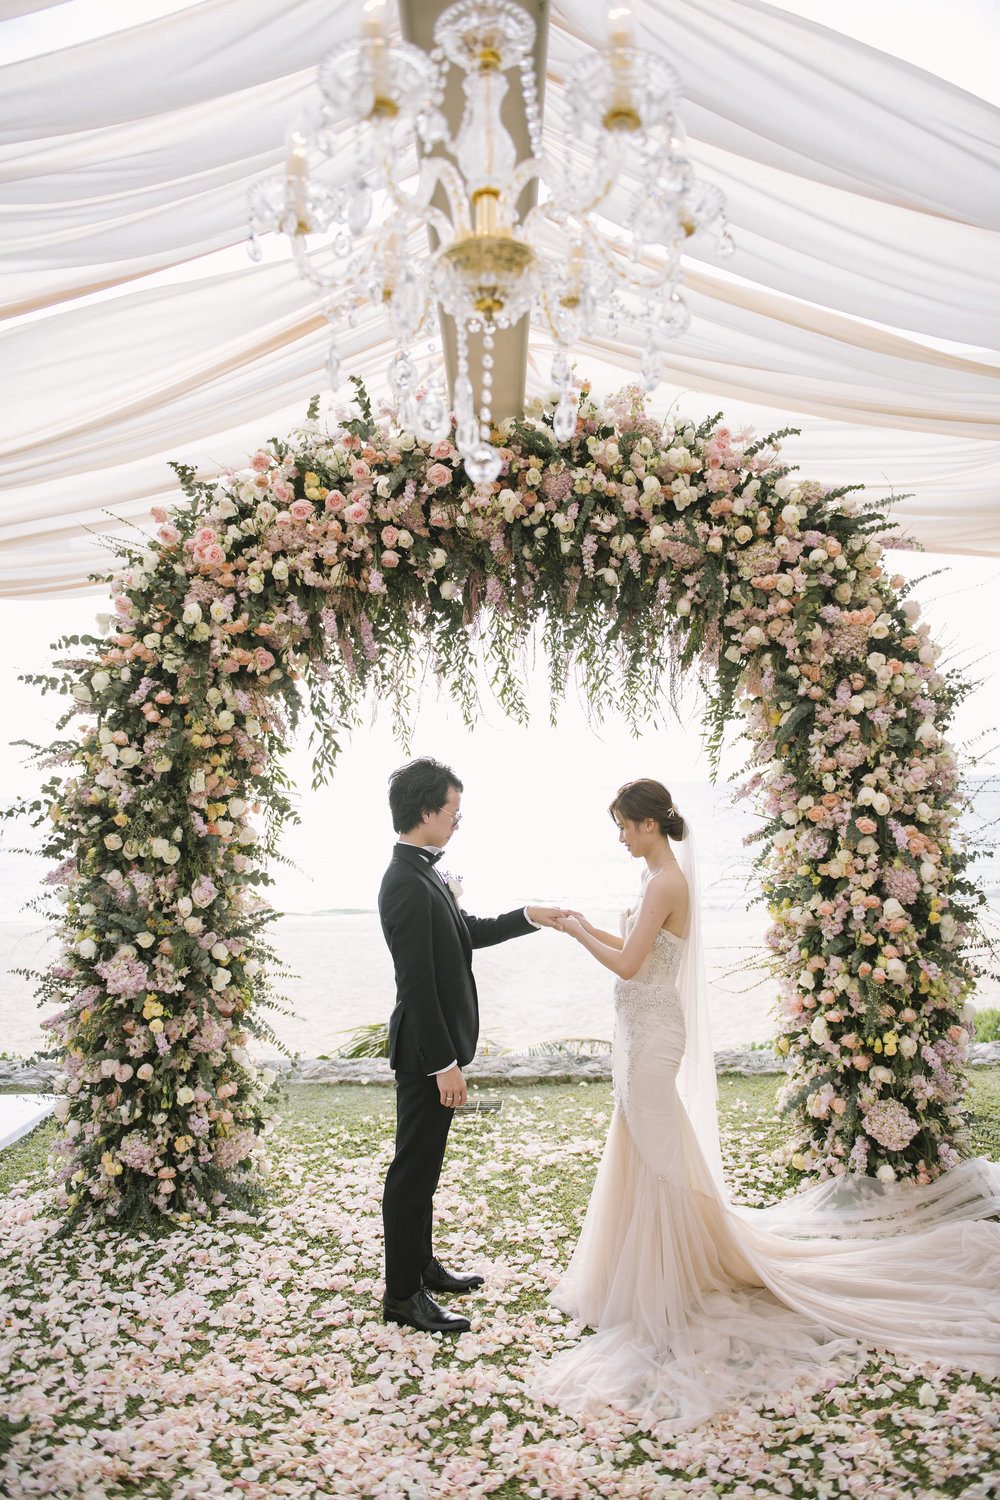 Intimate Thailand Wedding with a Pastel Garden Ambiance ⋆ Ruffled